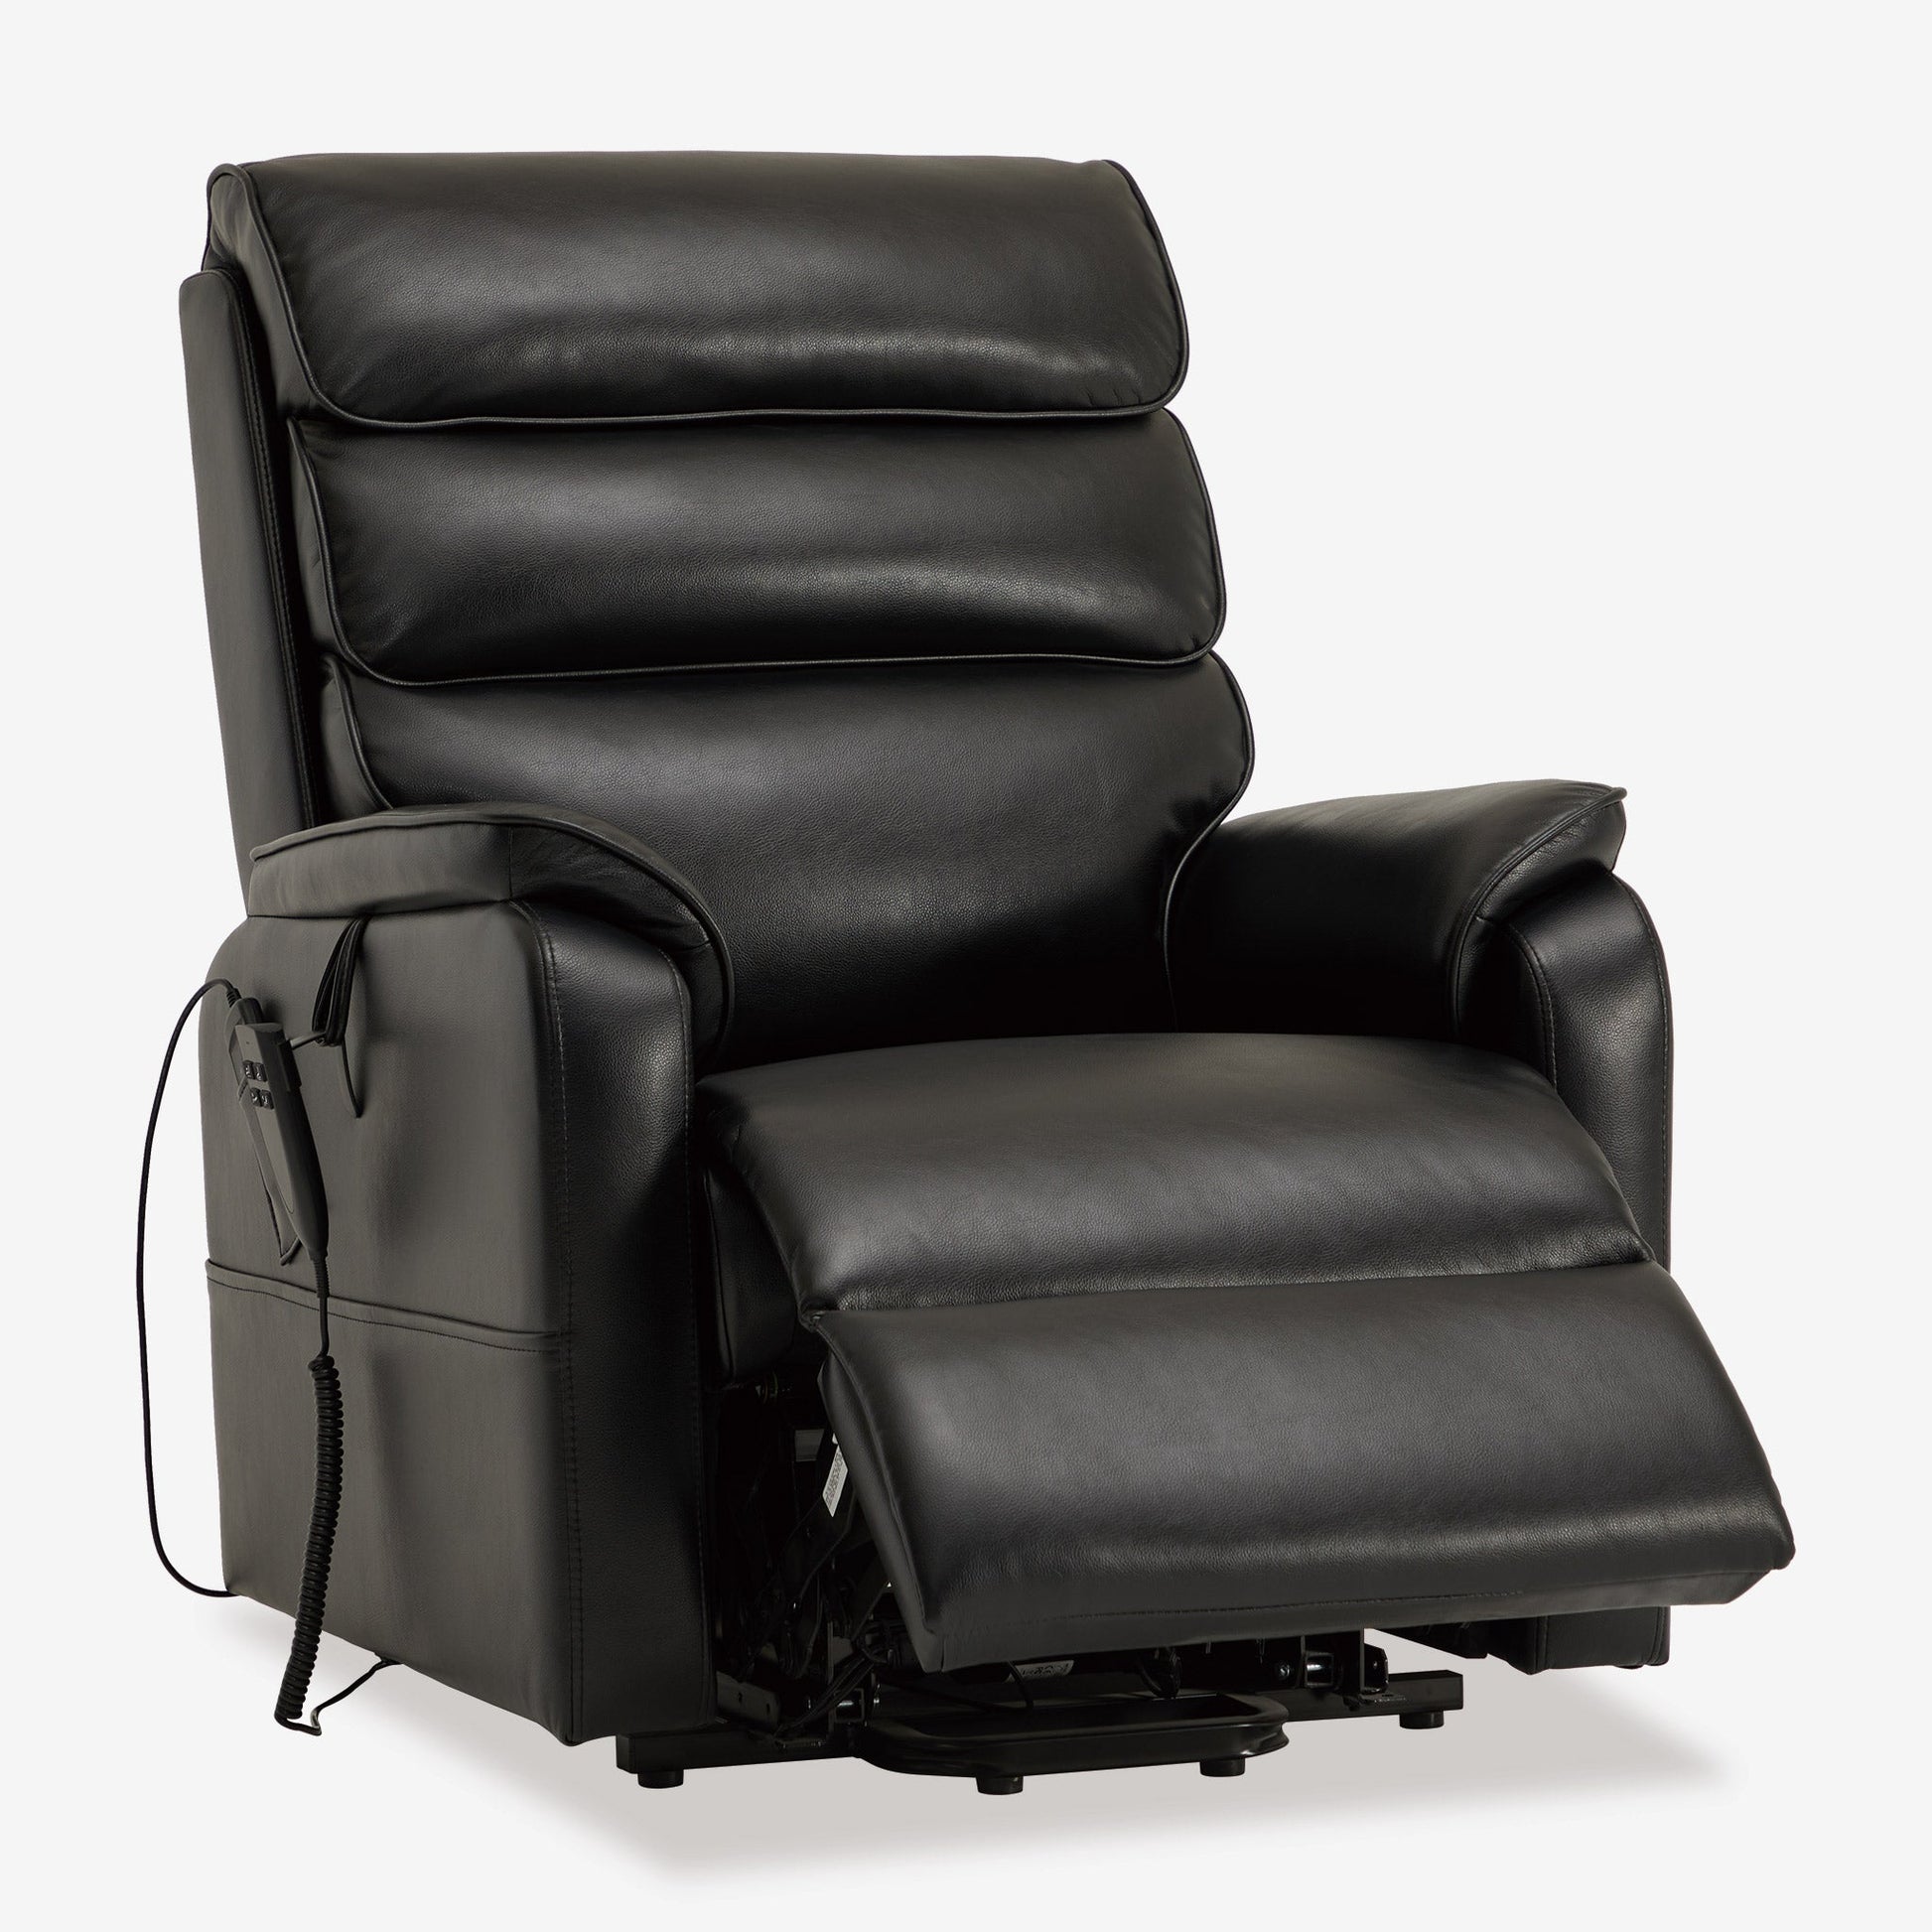 Lie Flat Recliner With Heat Massage And Infinite Positons